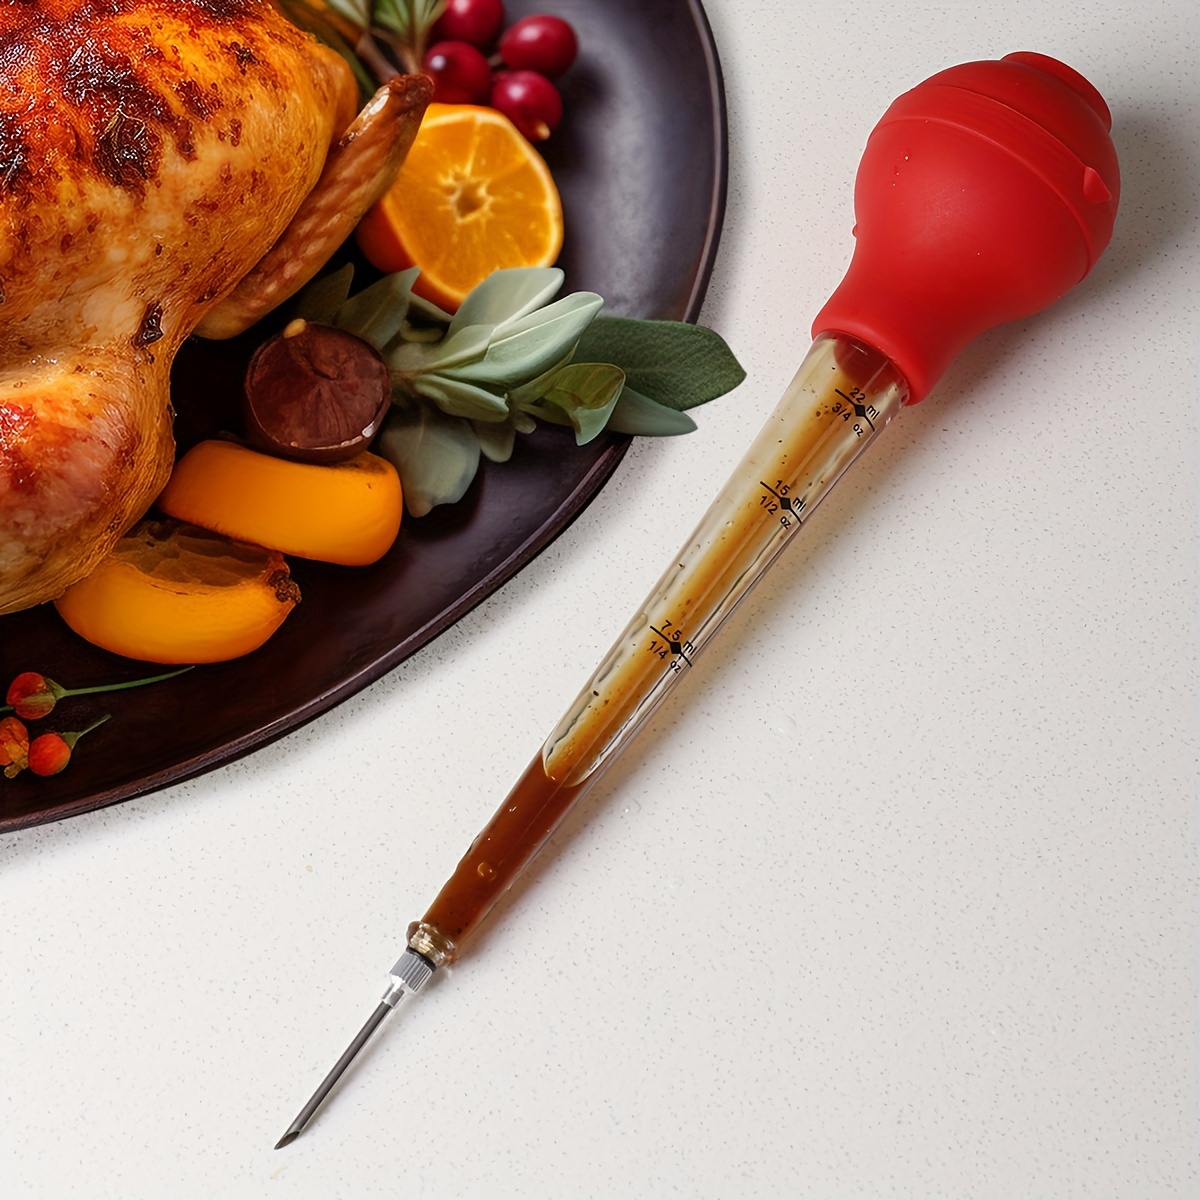 Home Kitchenware Silicone Cooking Tool Baster Turkey Barbecue